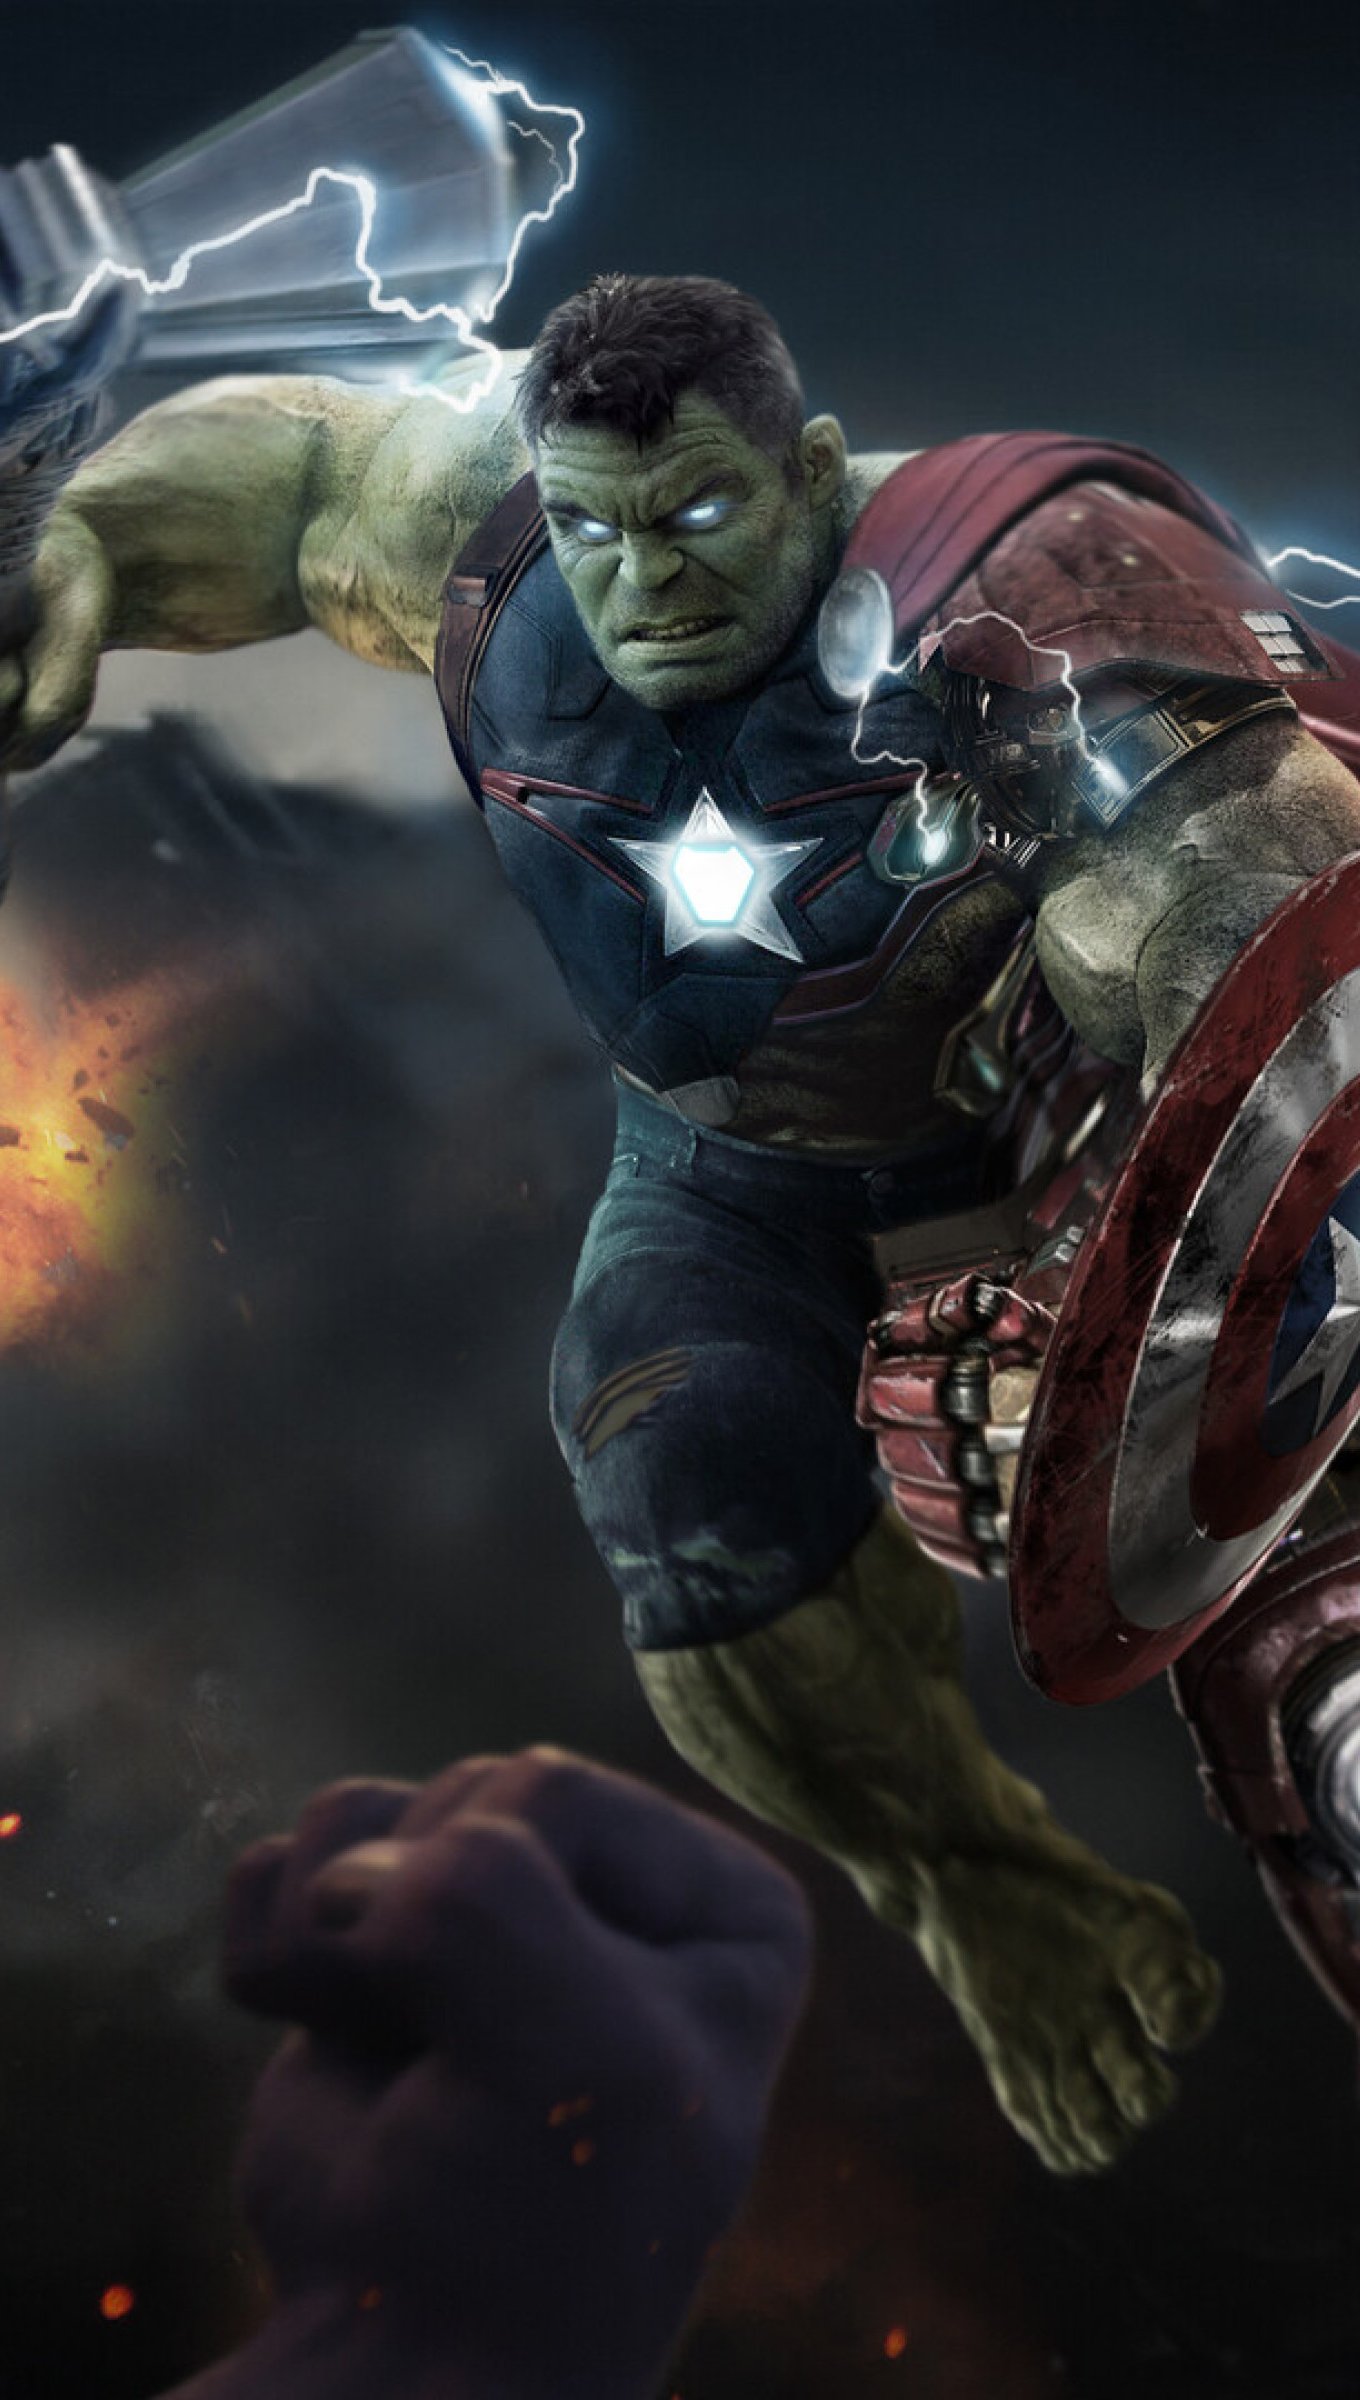 Hulk - 3D and CG & Abstract Background Wallpapers on Desktop Nexus (Image  826622)